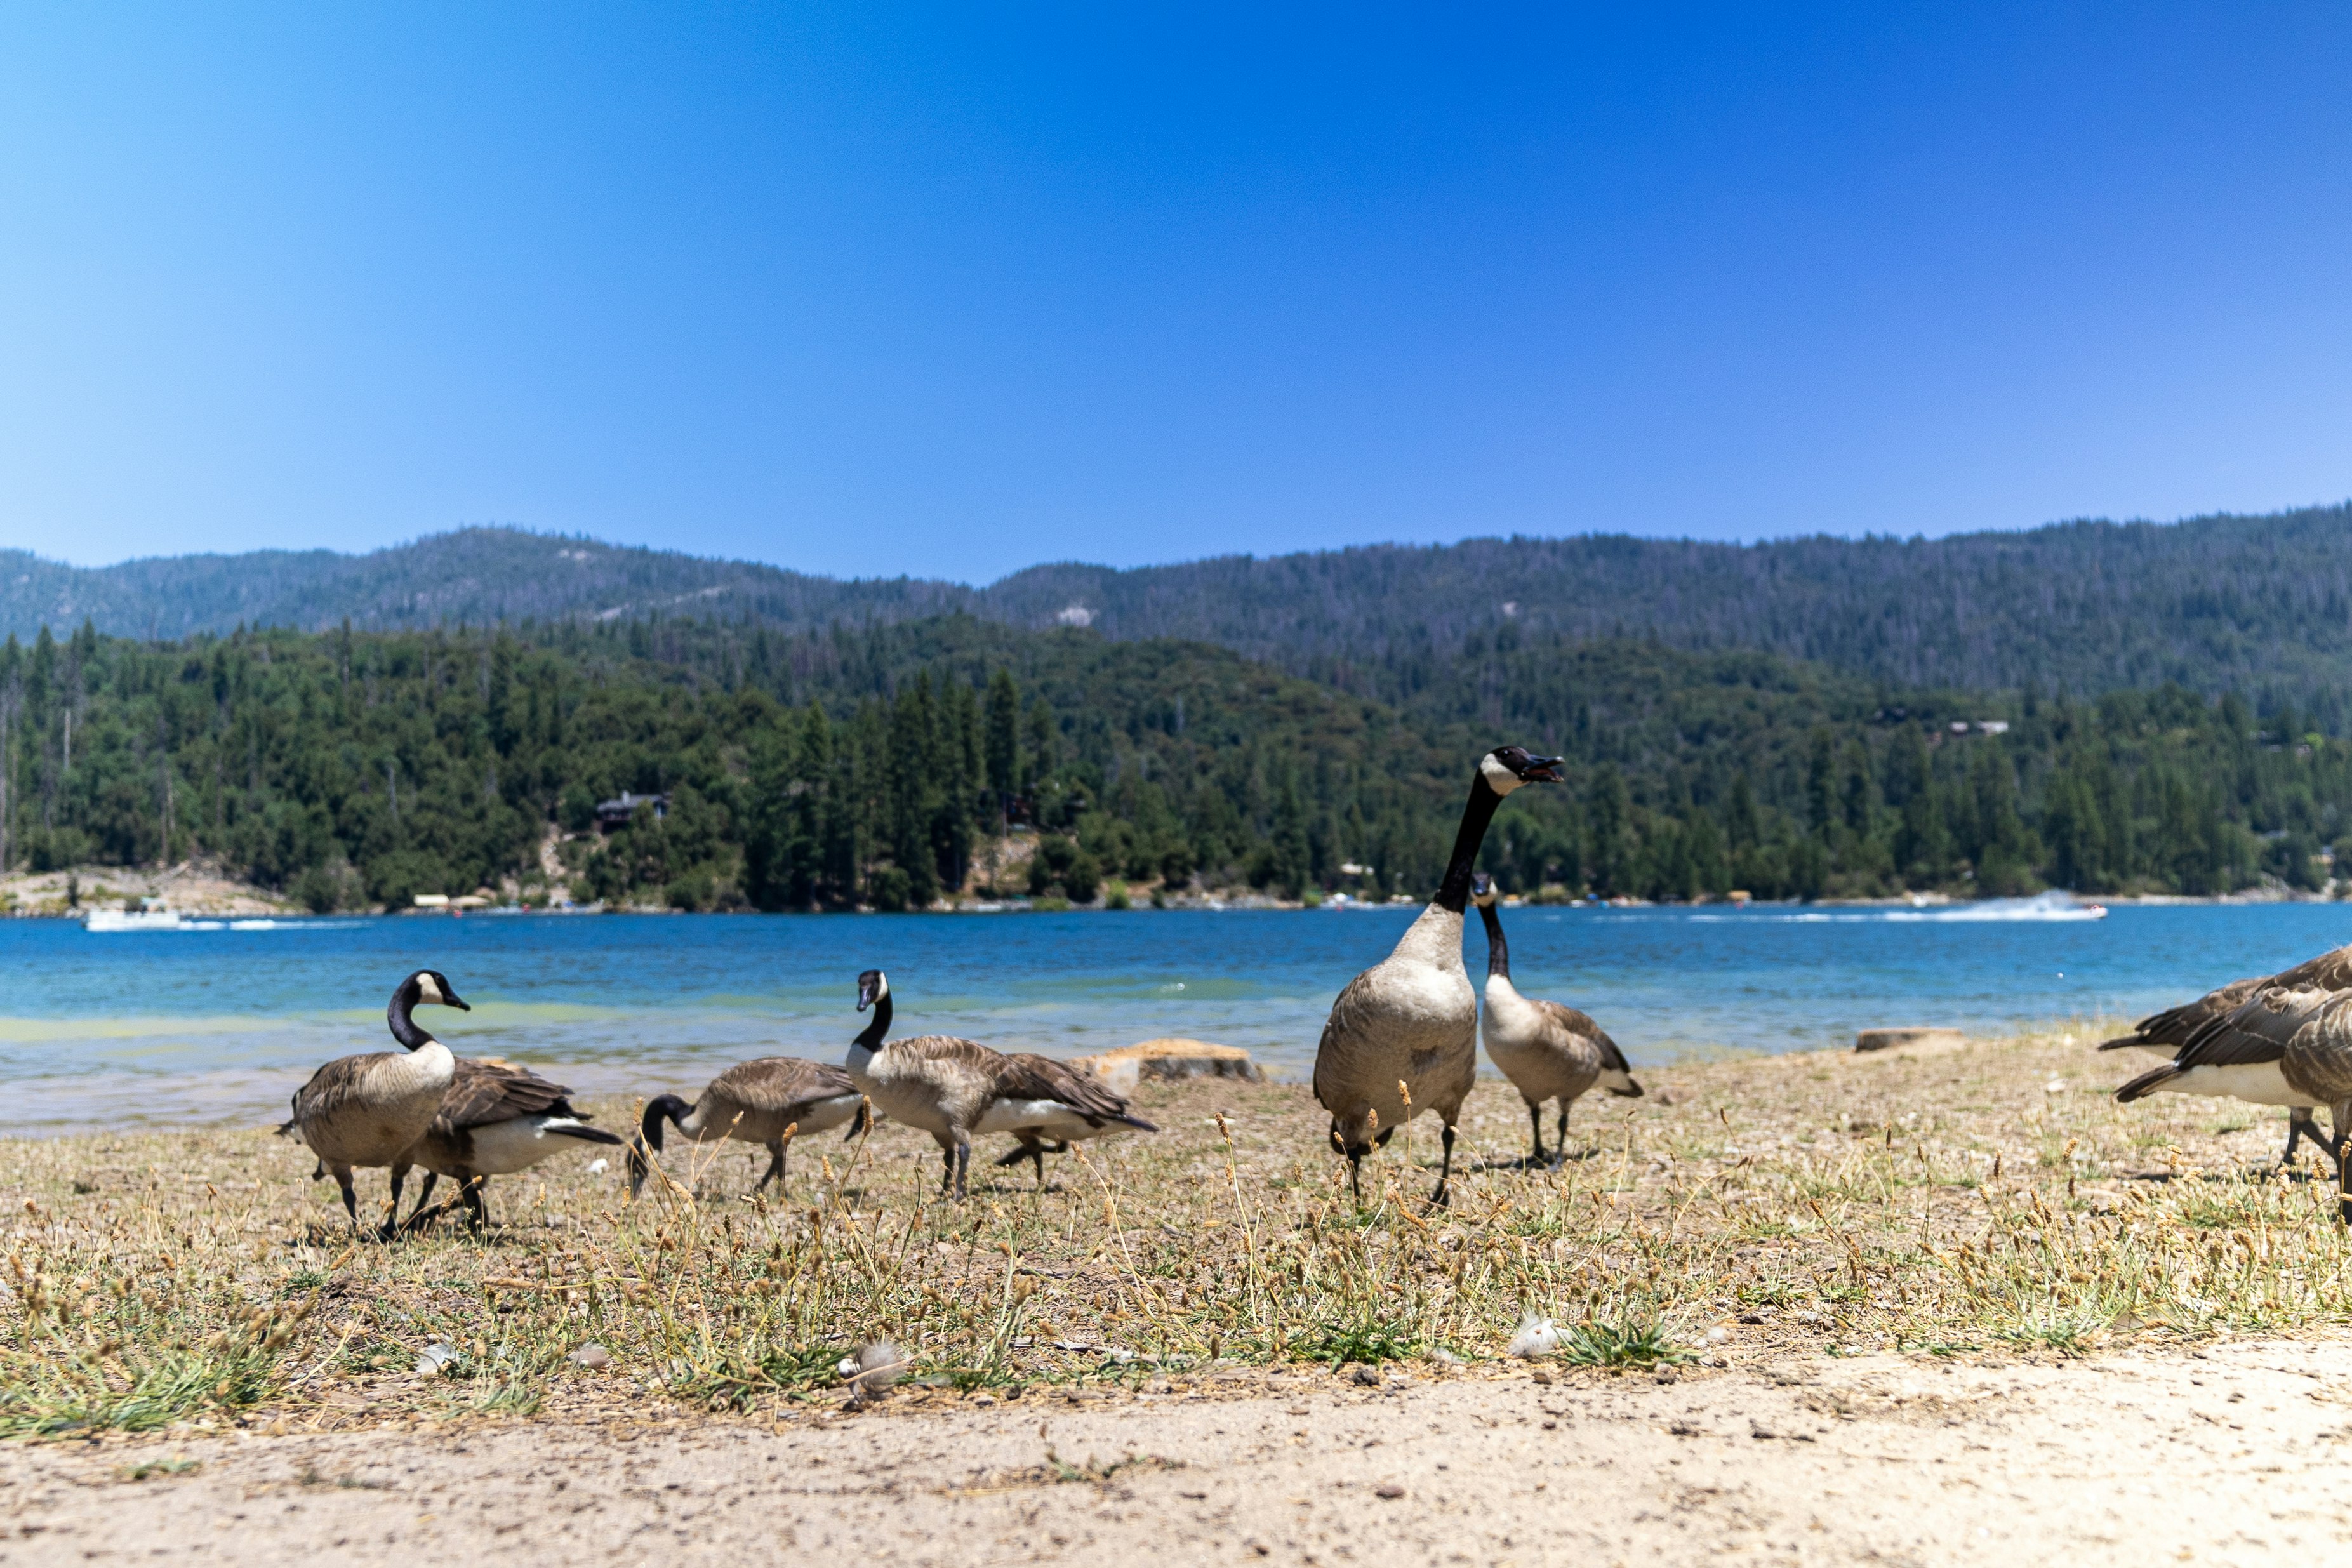 Geese at Bass Lake, CA. Photo by Marty O'Neill of Drastic Graphics.